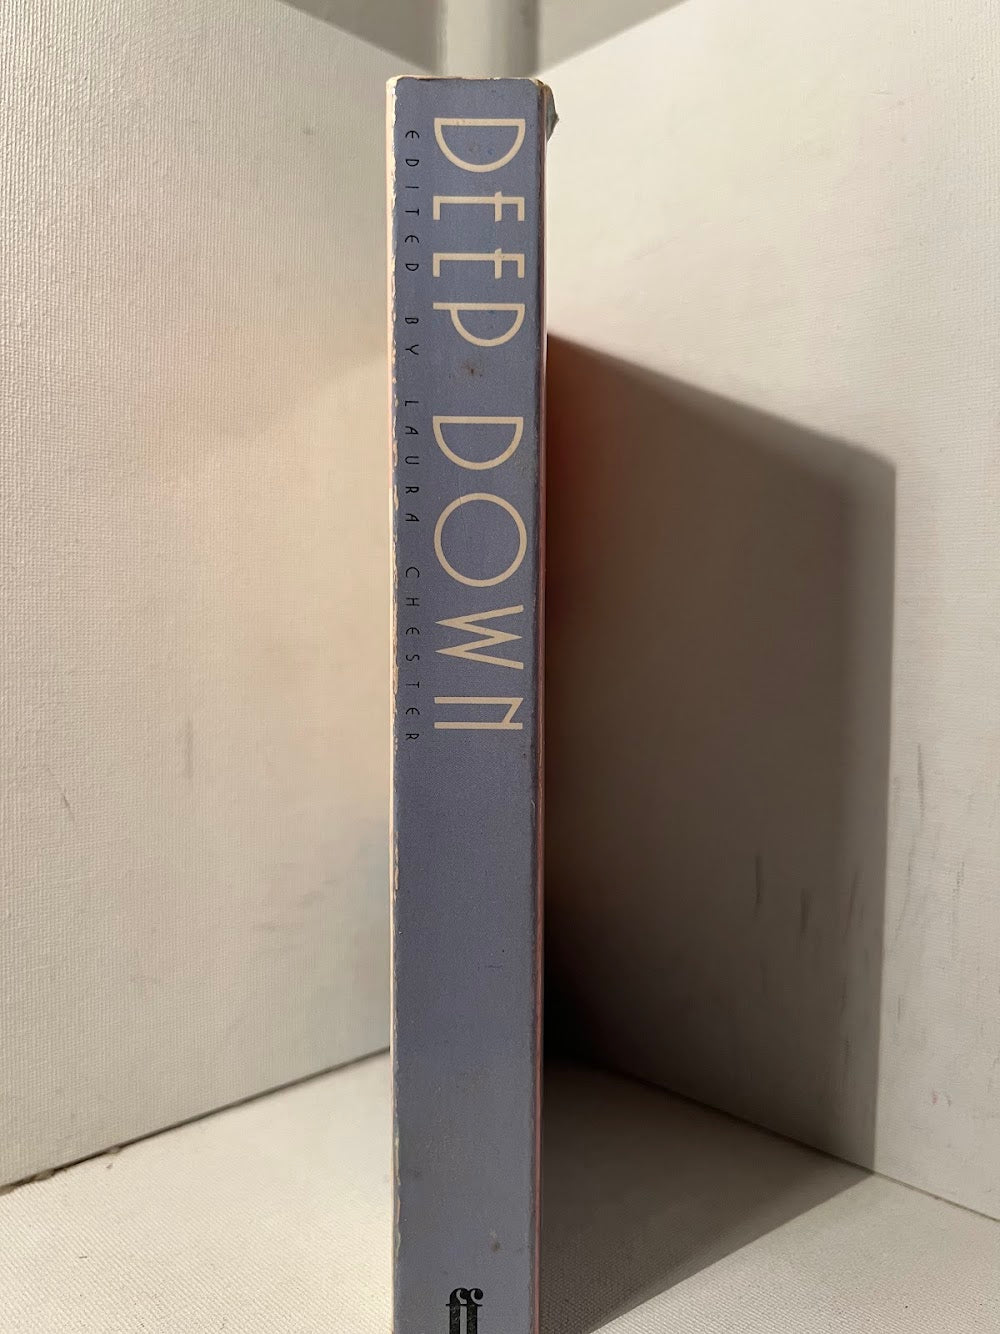 Deep Down: The New Sensual Writing by Women edited by Laura Chester